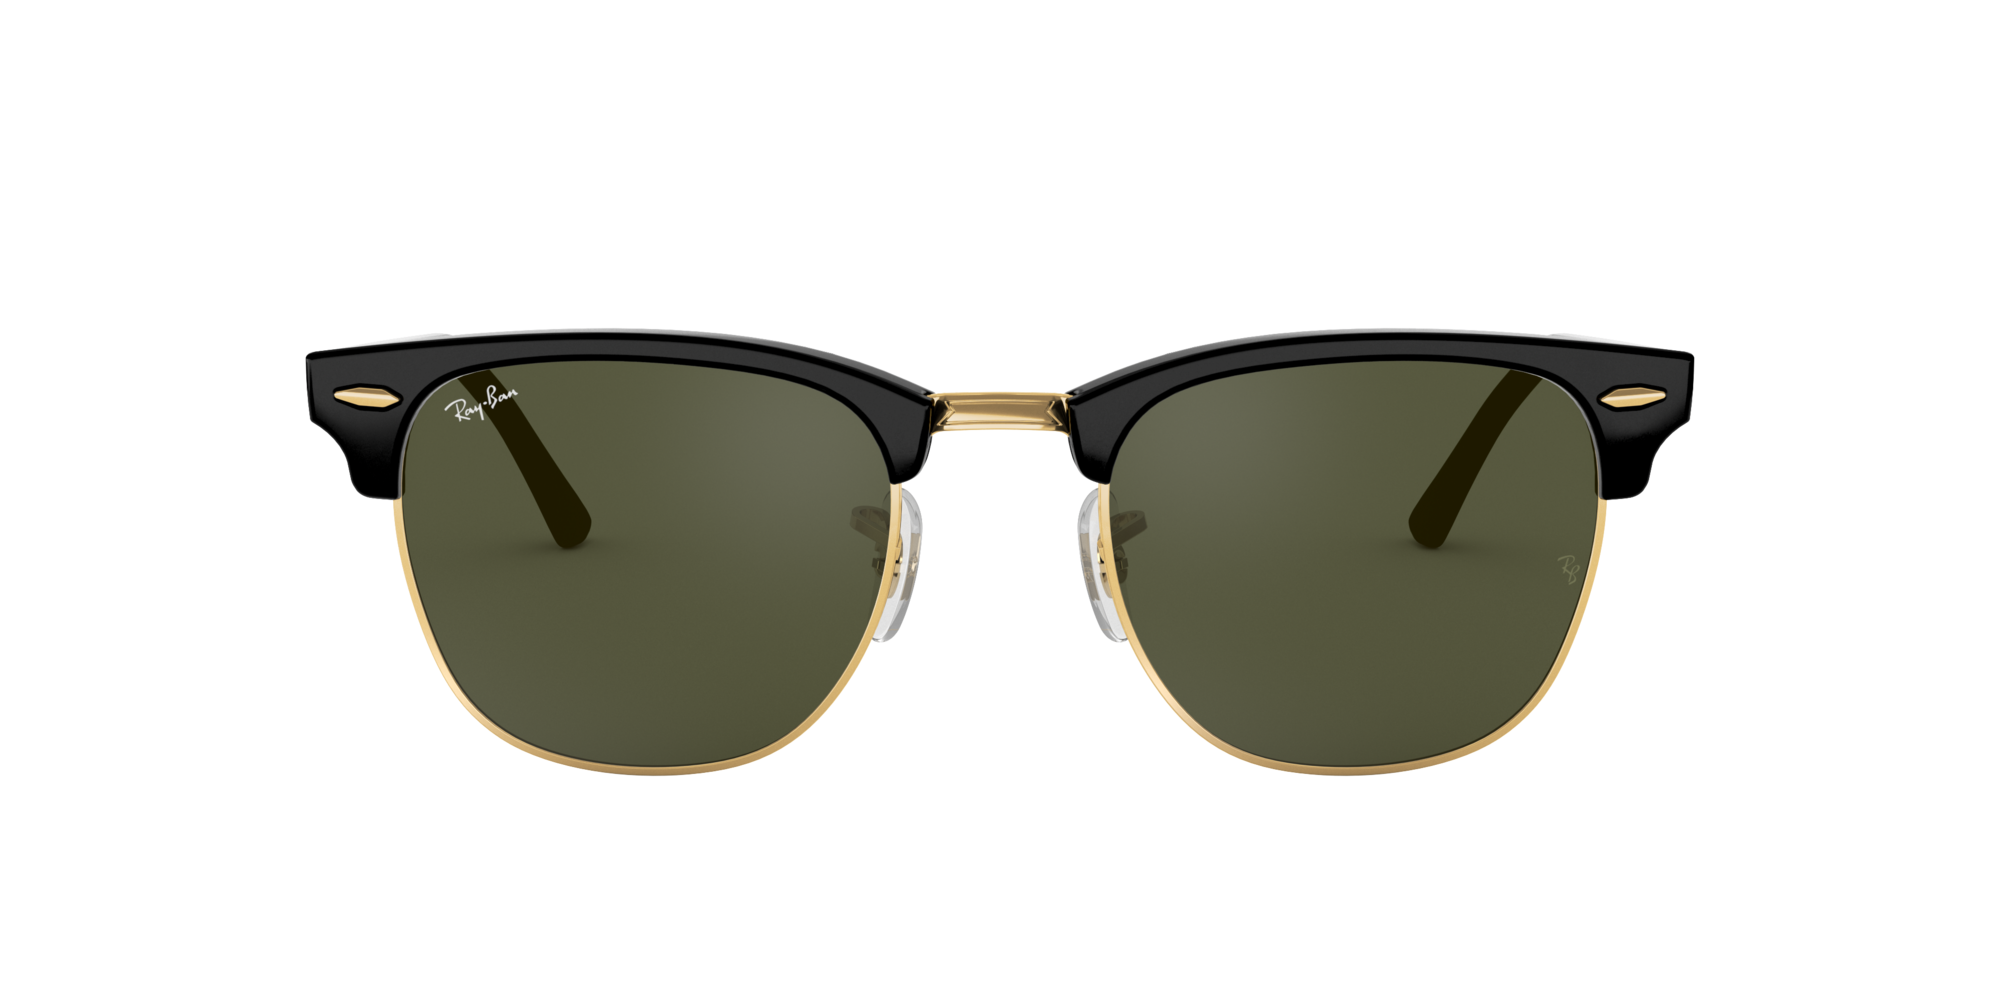 Ray Ban Rb3016 49 Clubmaster Sunglasses Lenscrafters